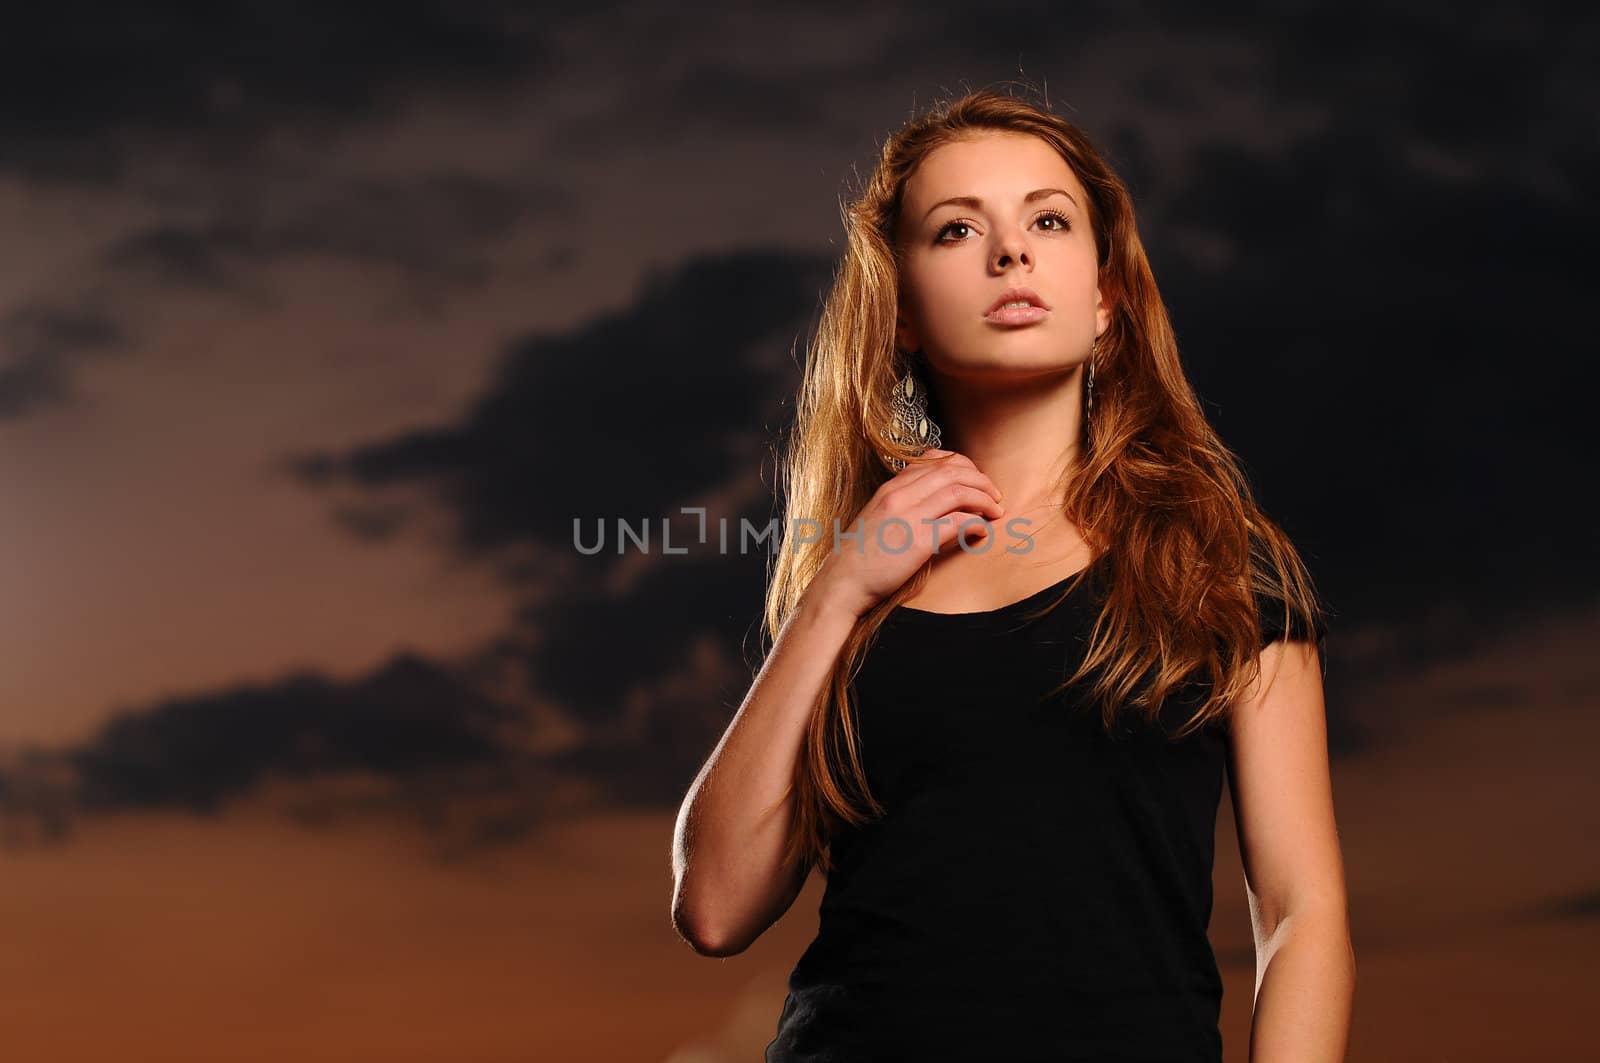 Portrait of a young attractive woman in a black shirt at dusk